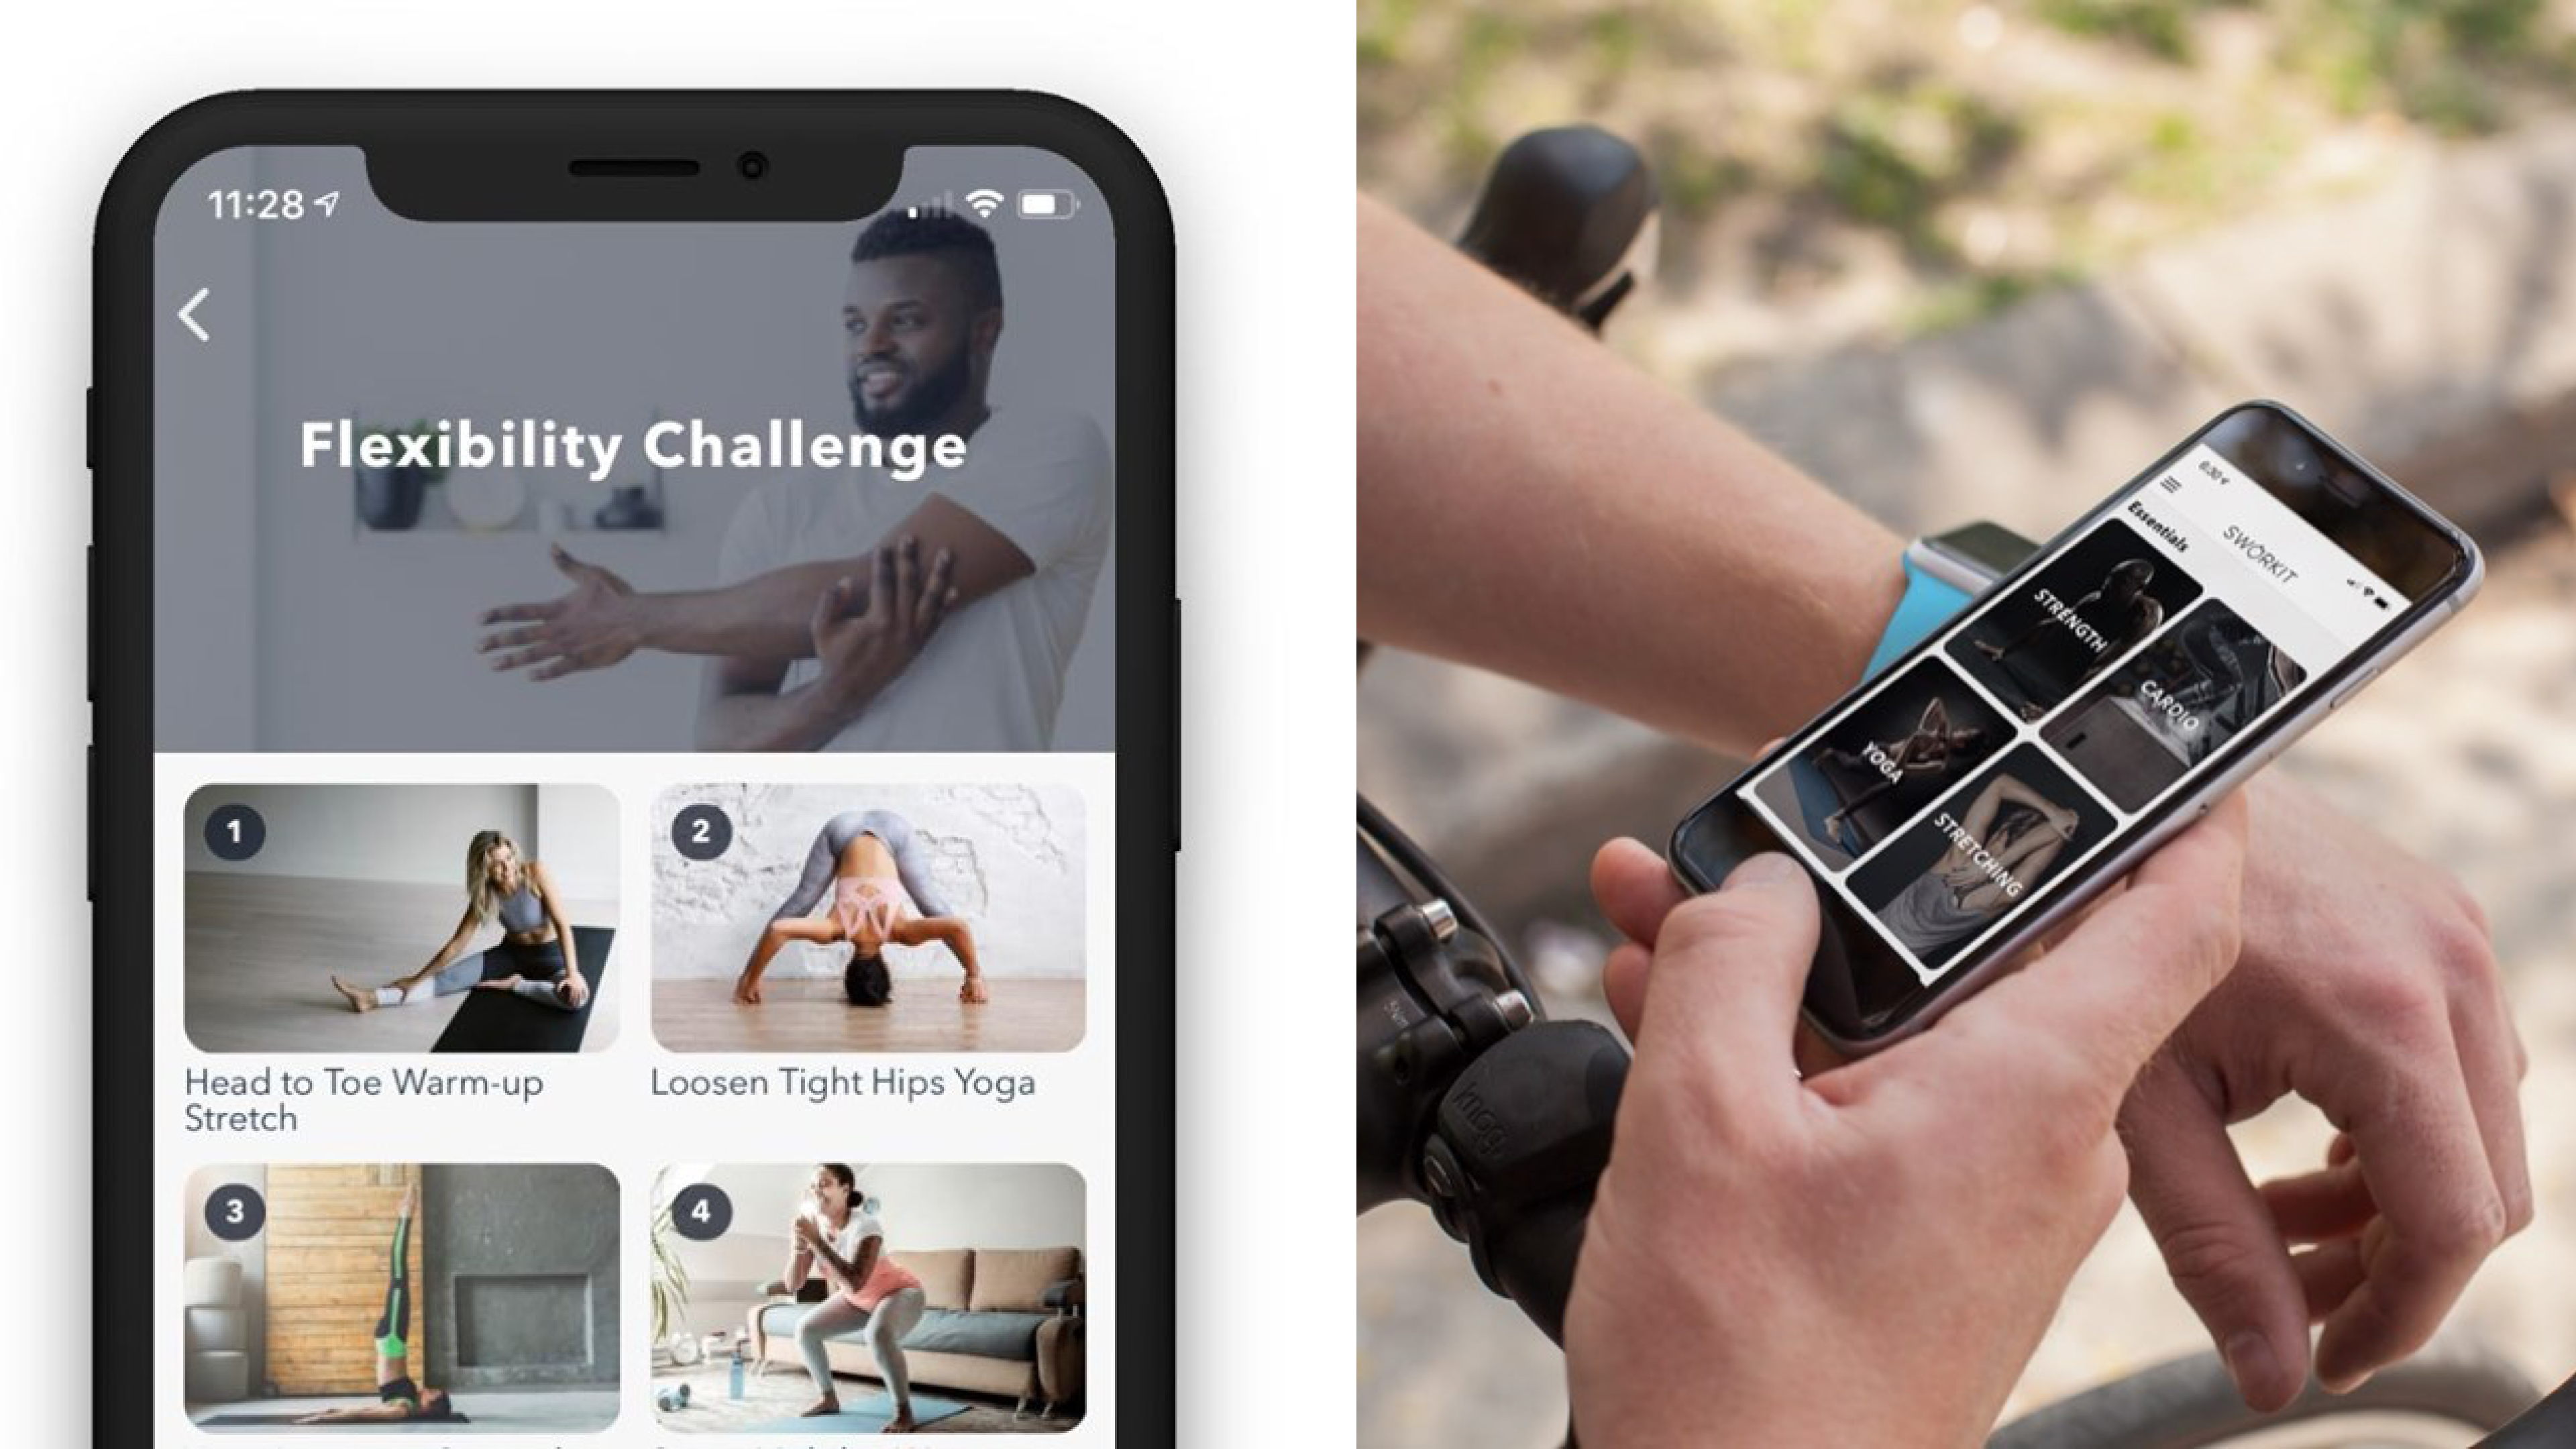 workout app with a wide variety of exercises for iPhone and Androids users